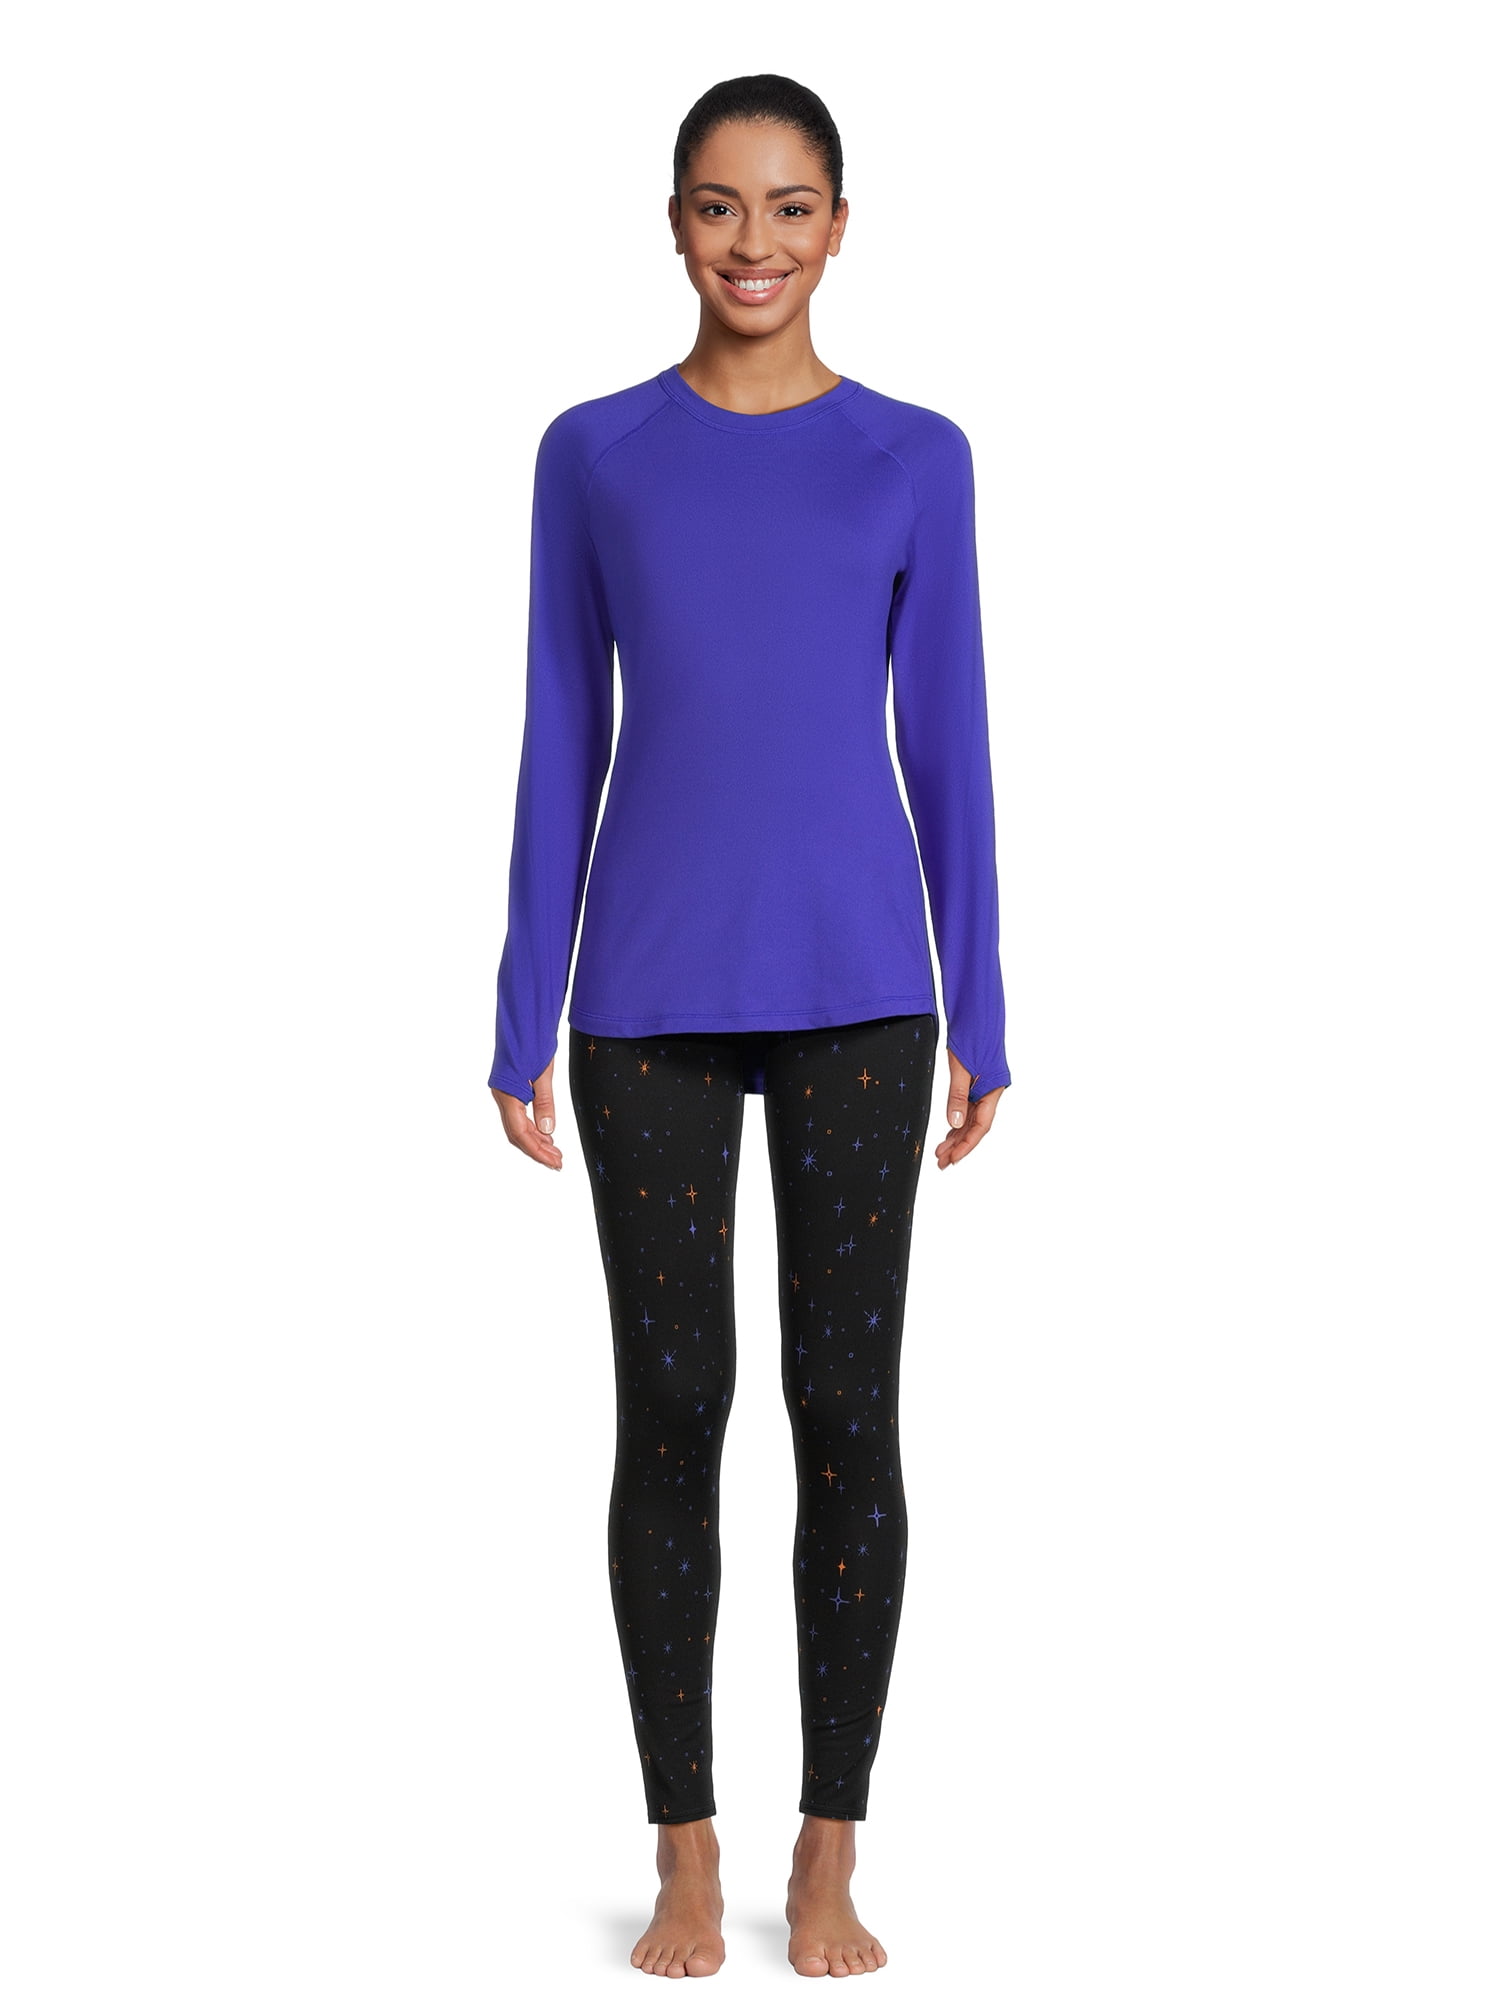 ClimateRight by Cuddl Duds Women's and Women's Plus Size Jersey